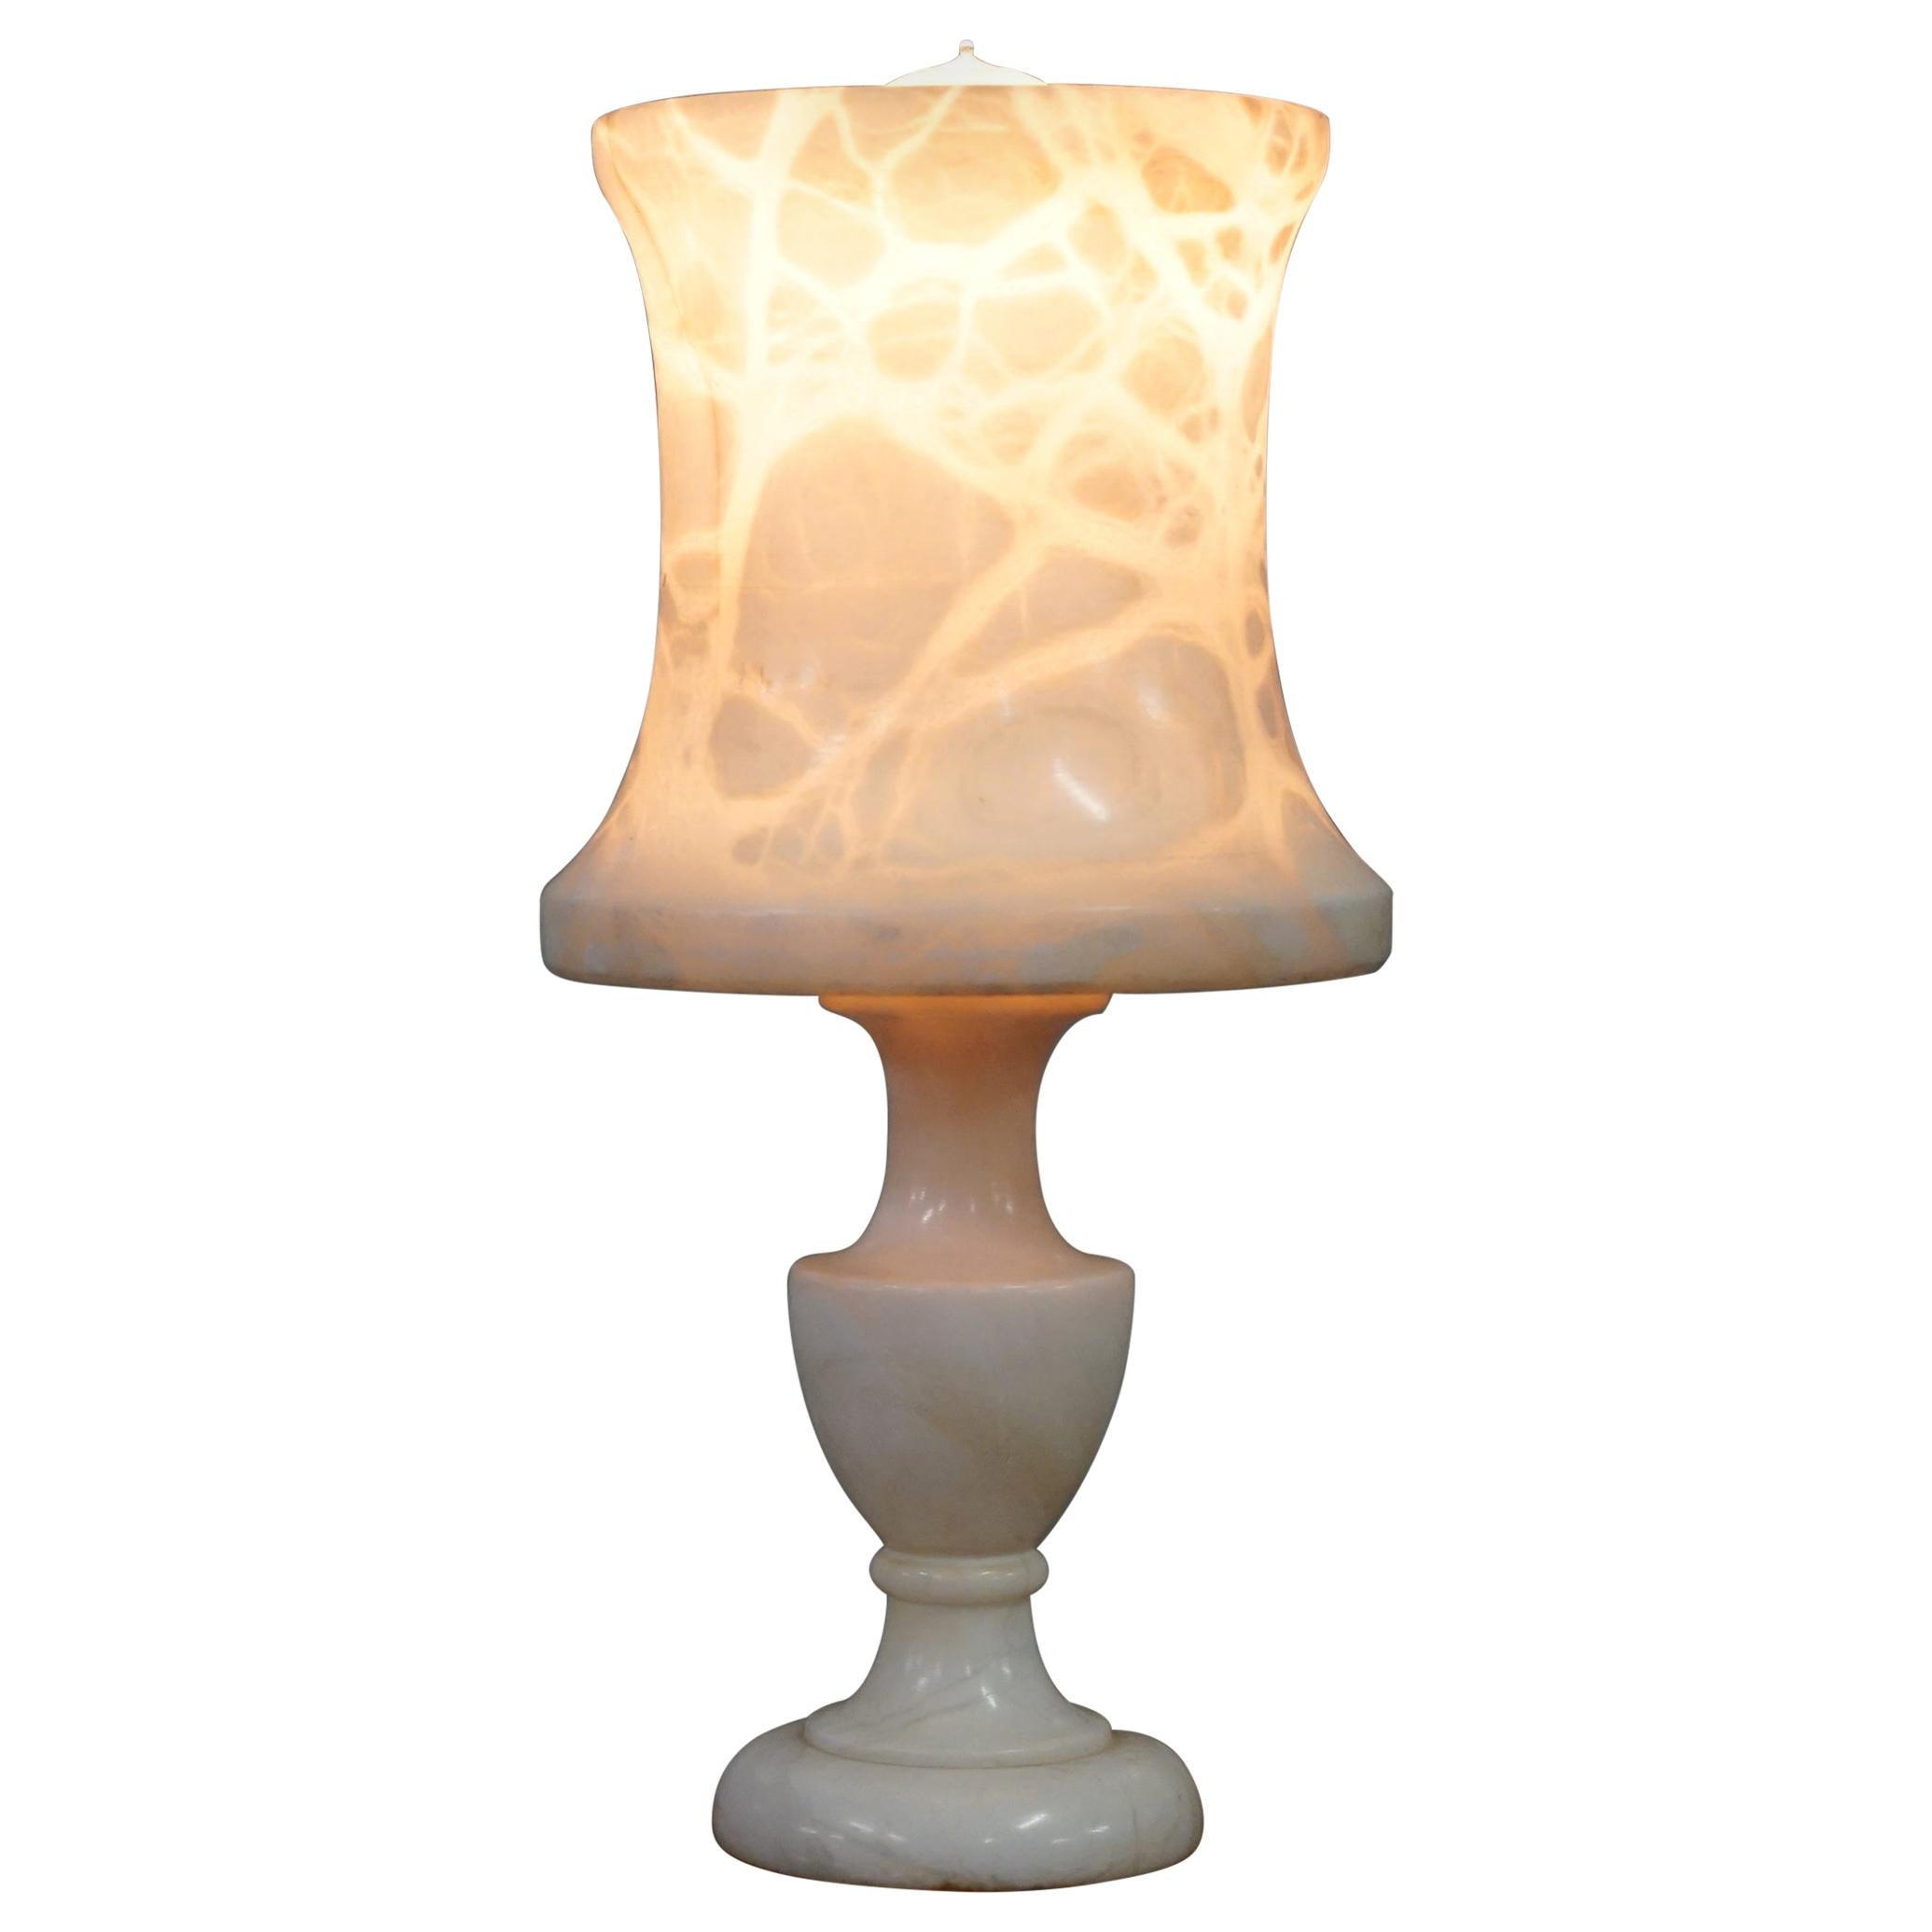 Stunning Solid Veined Marble Lamp Including Marble Shade, circa 1900 English